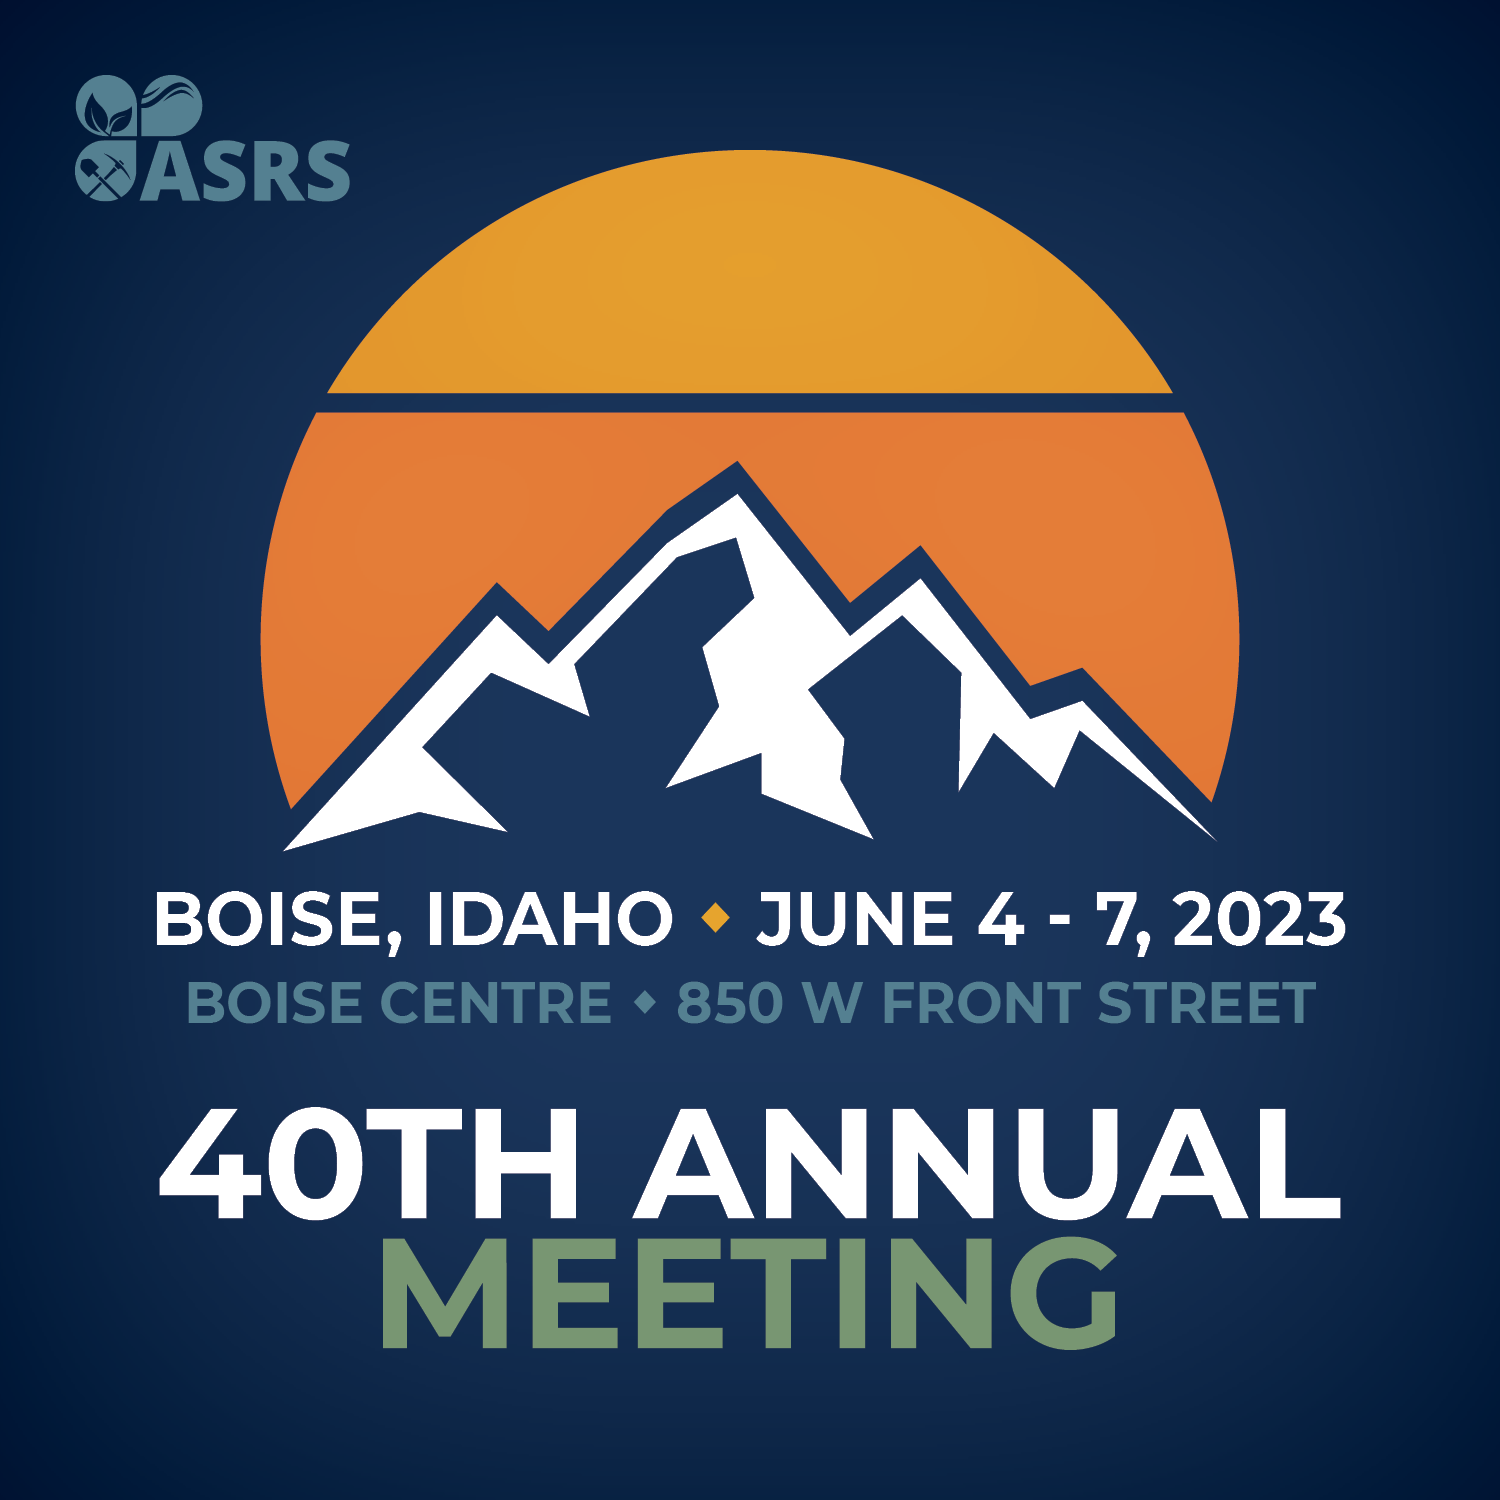 2023 Conference American Society of Reclamation Sciences (ASRS)